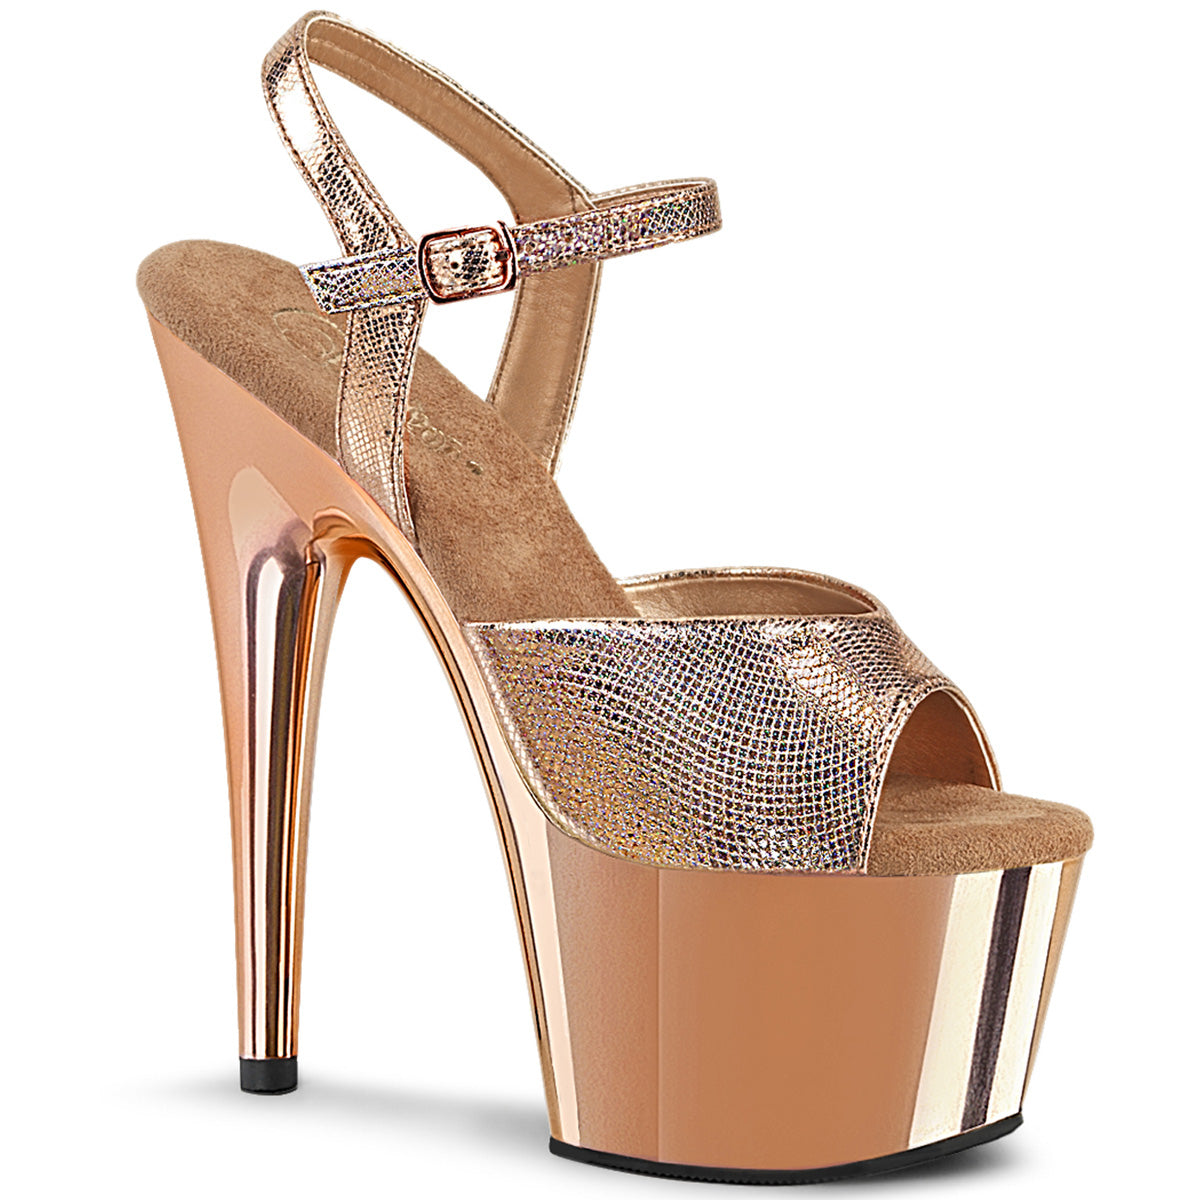 ADORE-709 Pole Dancing Exotic Strippers Shoes for Pole Dancing